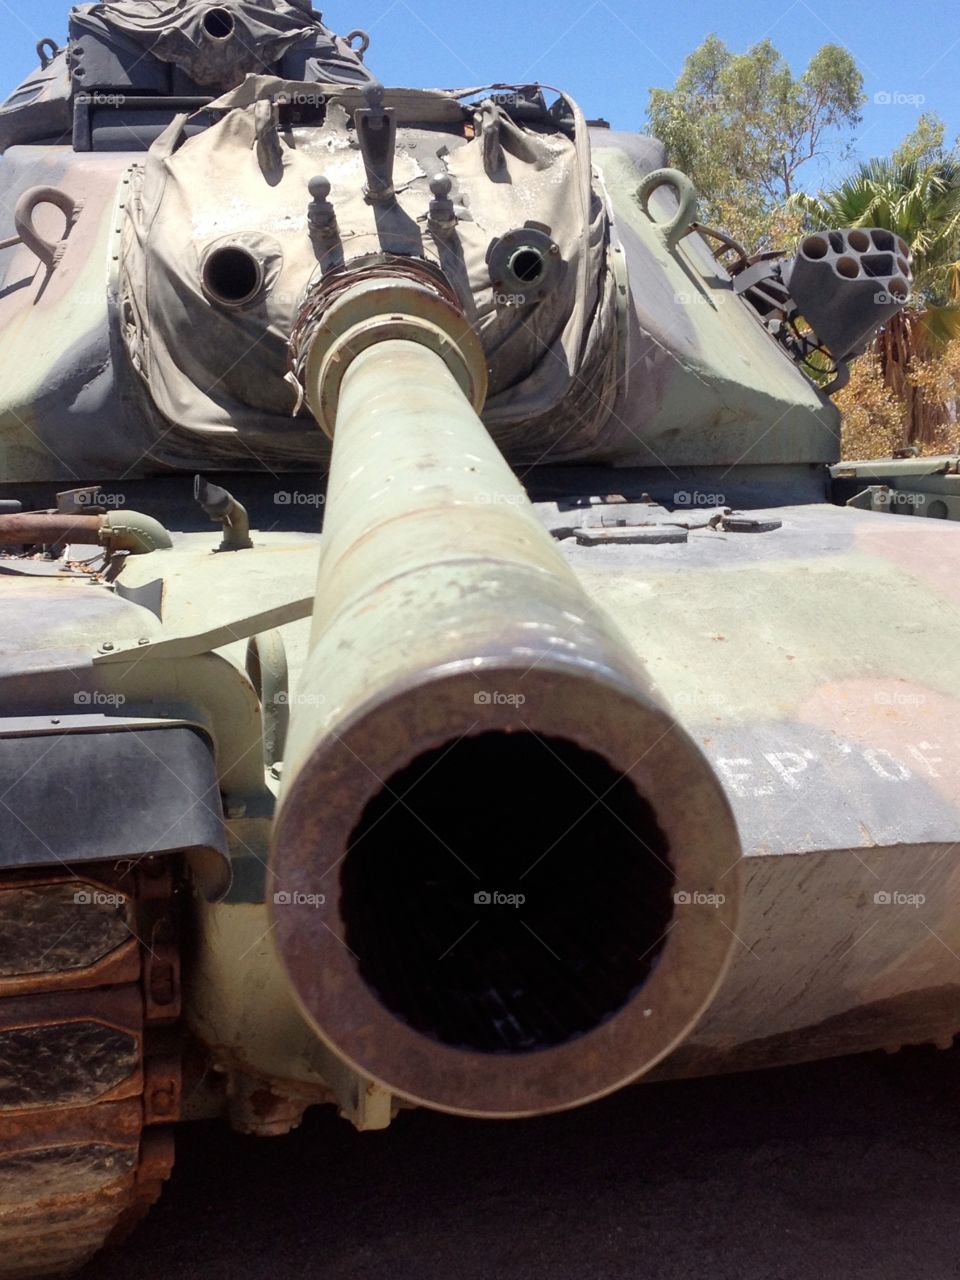 Looking down the barrel . Tank up close